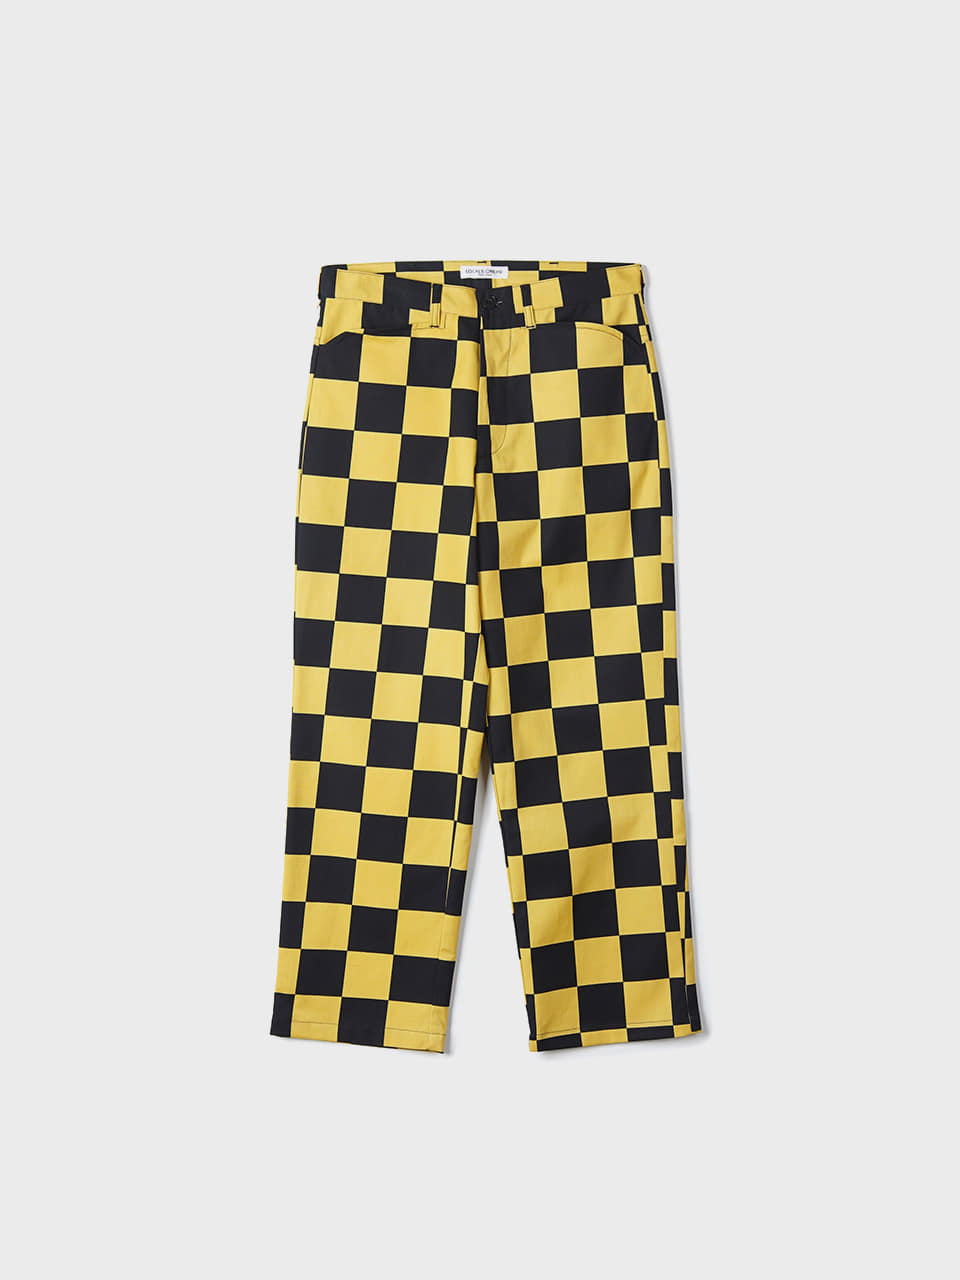 LOCALS ONLY Checker Board Pants &quot;Black/Yellow&quot;